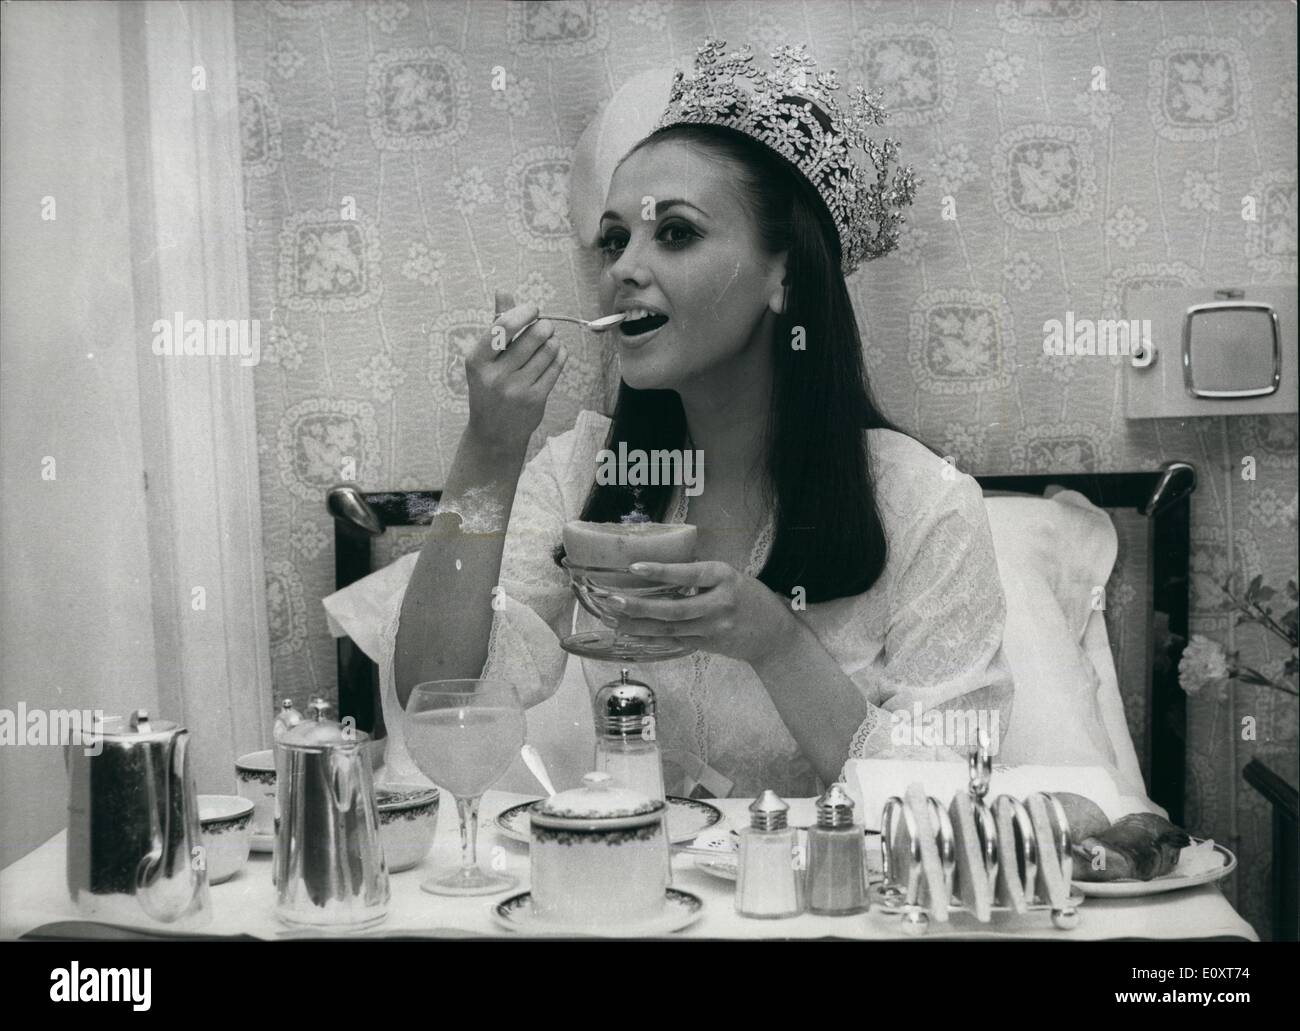 Nov. 11, 1967 - Breakfast In Bed For The New ''Miss World'': Miss Peru, 21-year-old Madeline Hartog-Bel, who last night became ''Miss World'' was served with breakfast in bed as she awoke to her new wonderful world at the Waldorf Hotel this morning. Photo shows Miss Peru (Madeline Hartog-Bel) the new ''Miss World'' sits up in bed with her breakfast on a tray at the Waldorf Hotel, London, this morning. Stock Photo